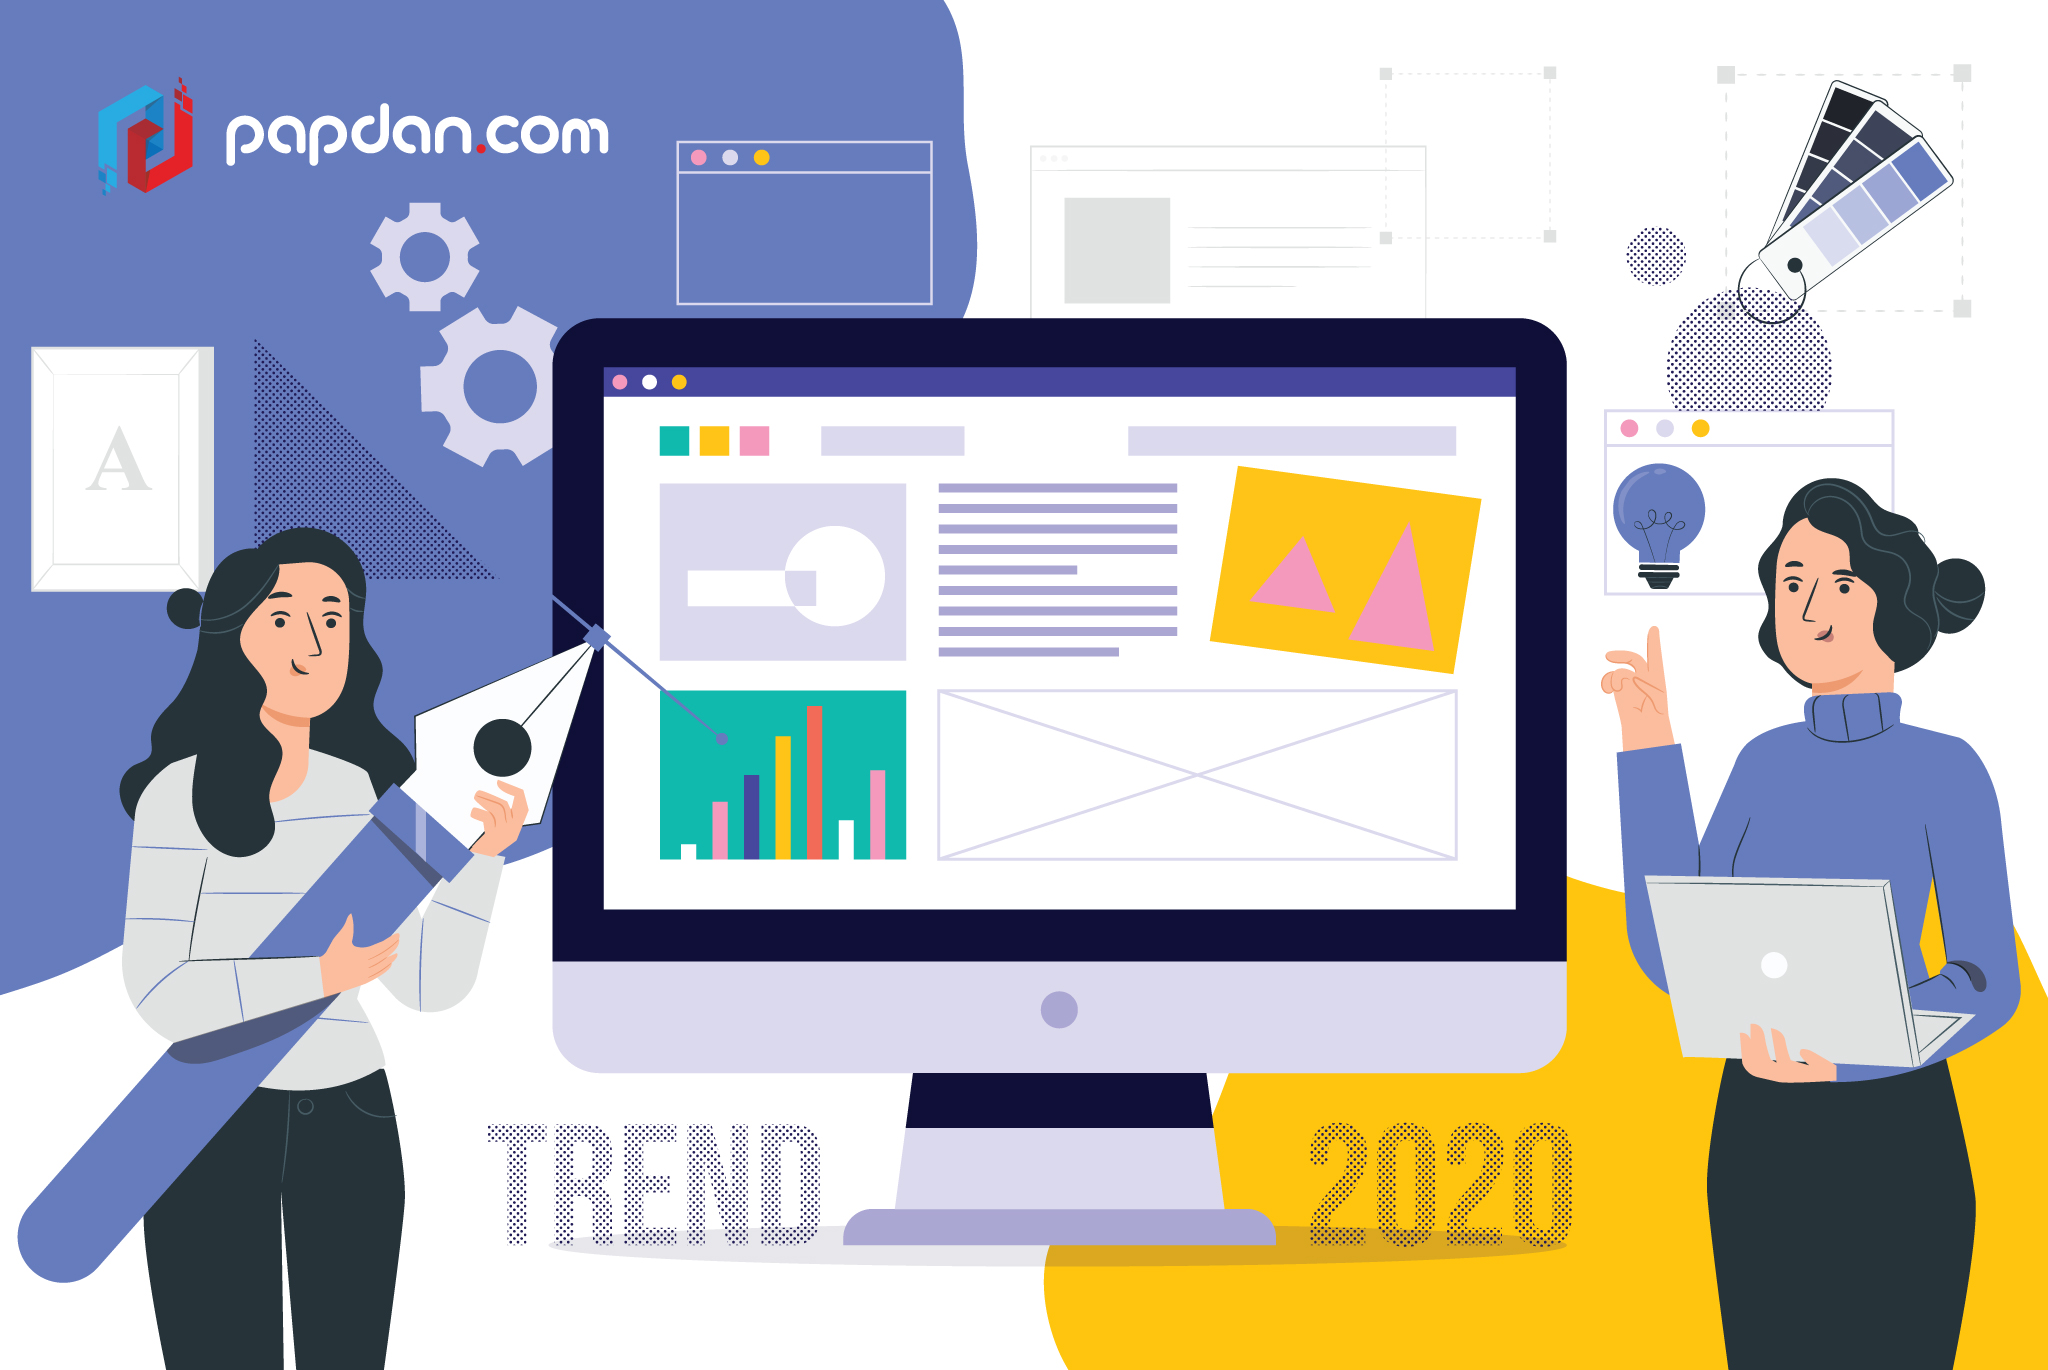 Web Designs Trends to Follow in 2020